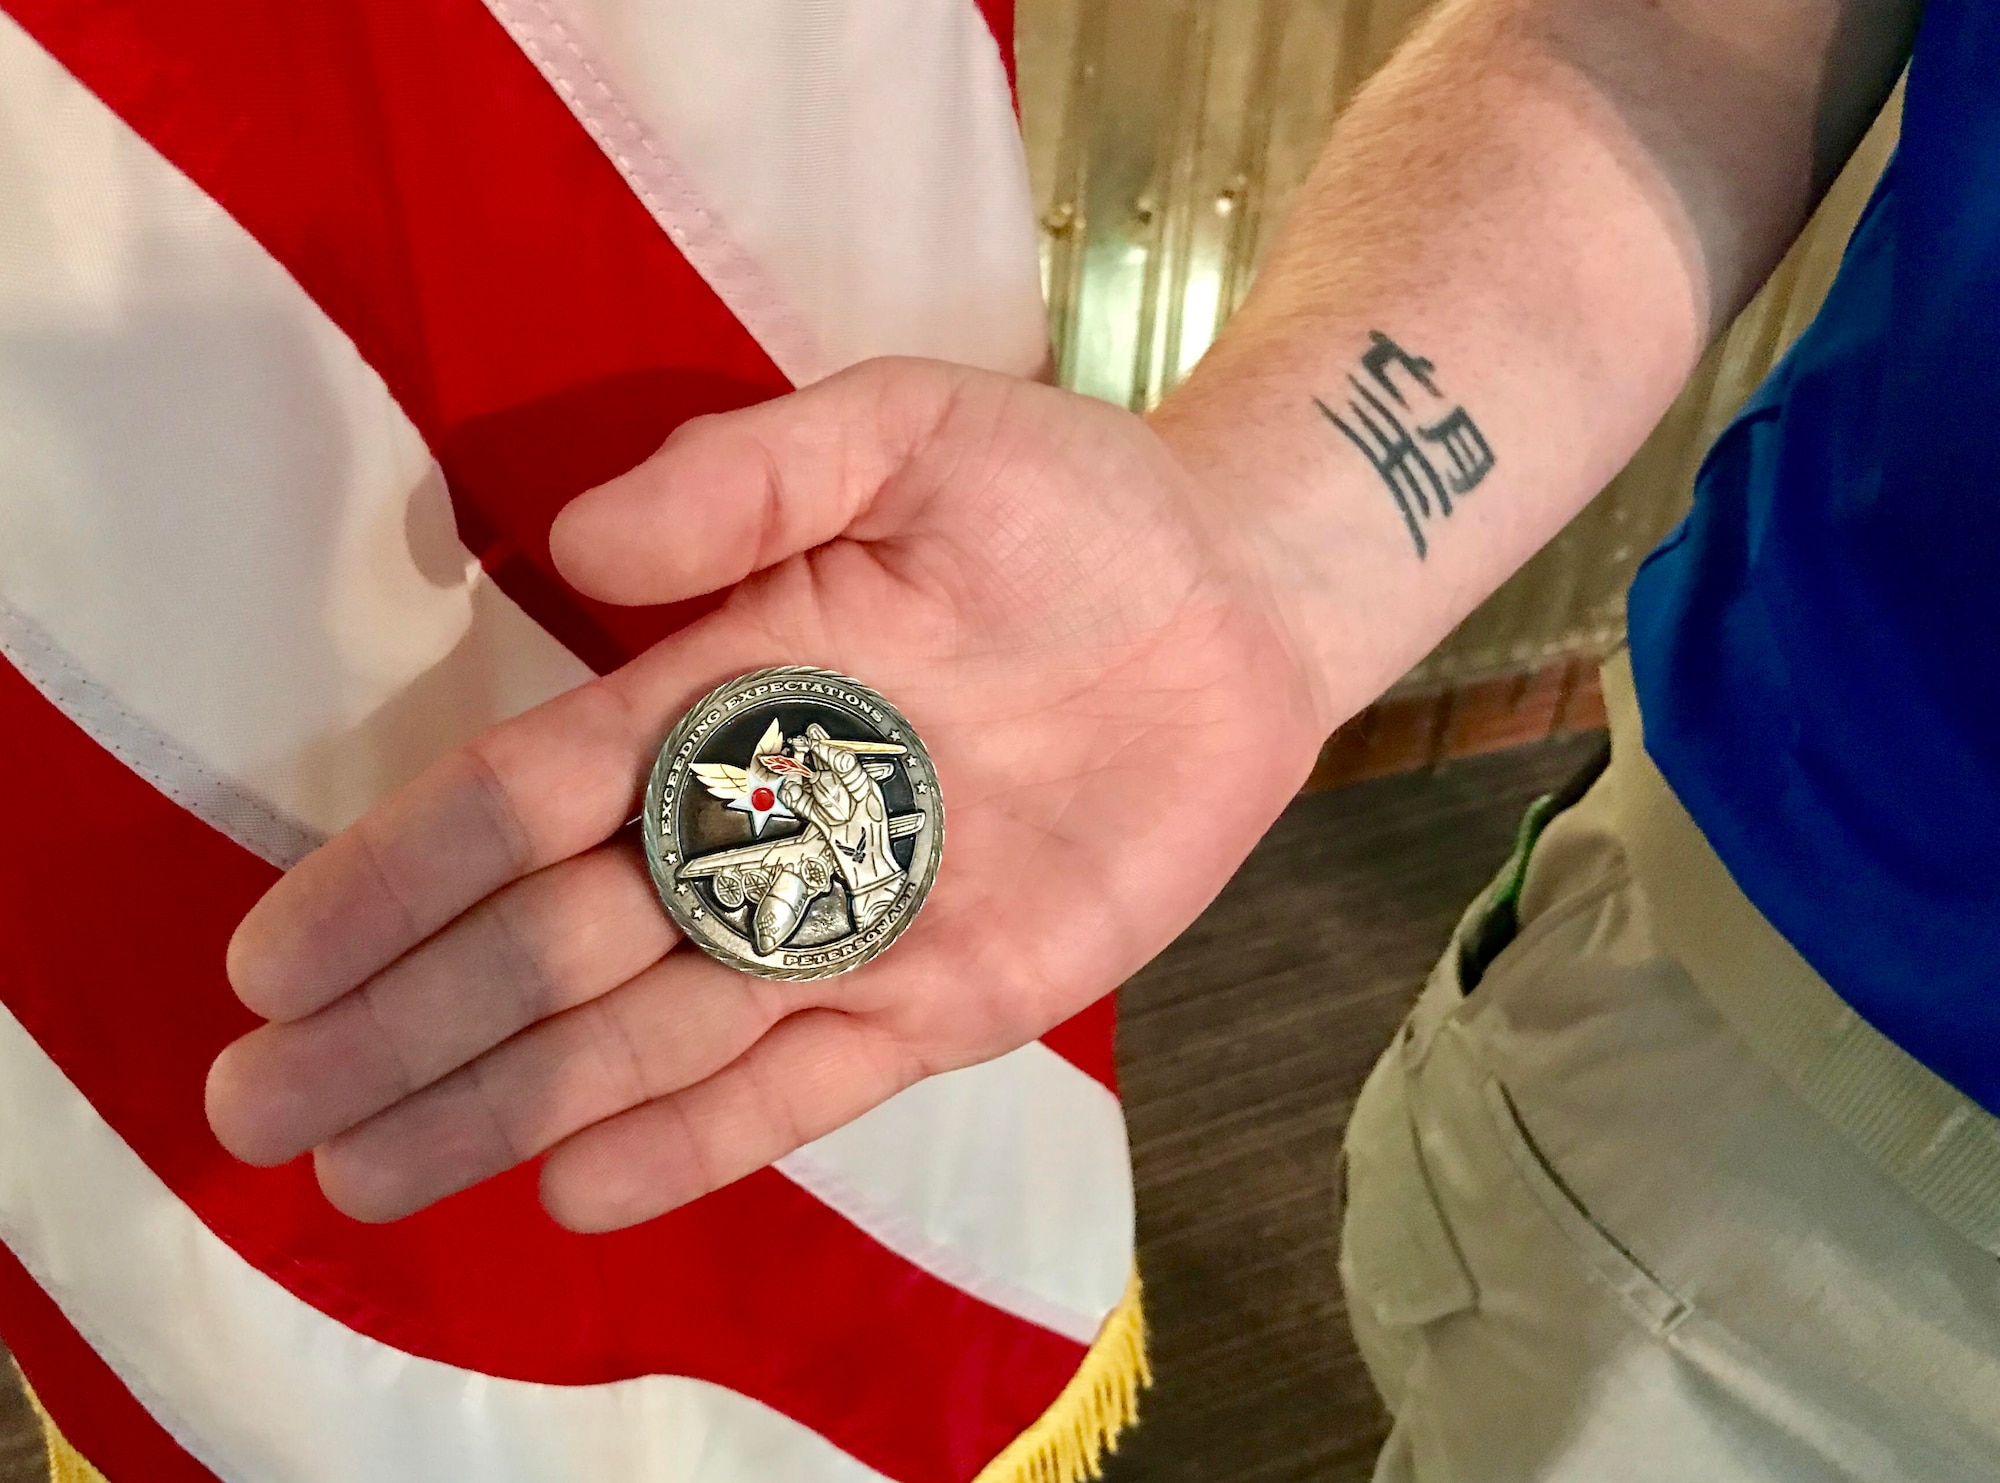 U.S. Air Force retired Staff Sgt. Cory Sandoval displays his coin, presented by Lt. Col. Summer Lewis, 21st Force Support Squadron commander, following a commander’s call at Peterson Air Force Base, Colorado, June 4, 2018. Lewis presented Sandoval with her coin after he shared his story with the squadron and shared how the Air Force Wounded Warrior Program saved his life following a tragic accident several years ago. (U.S. Air Force photo by Alexx Pons)